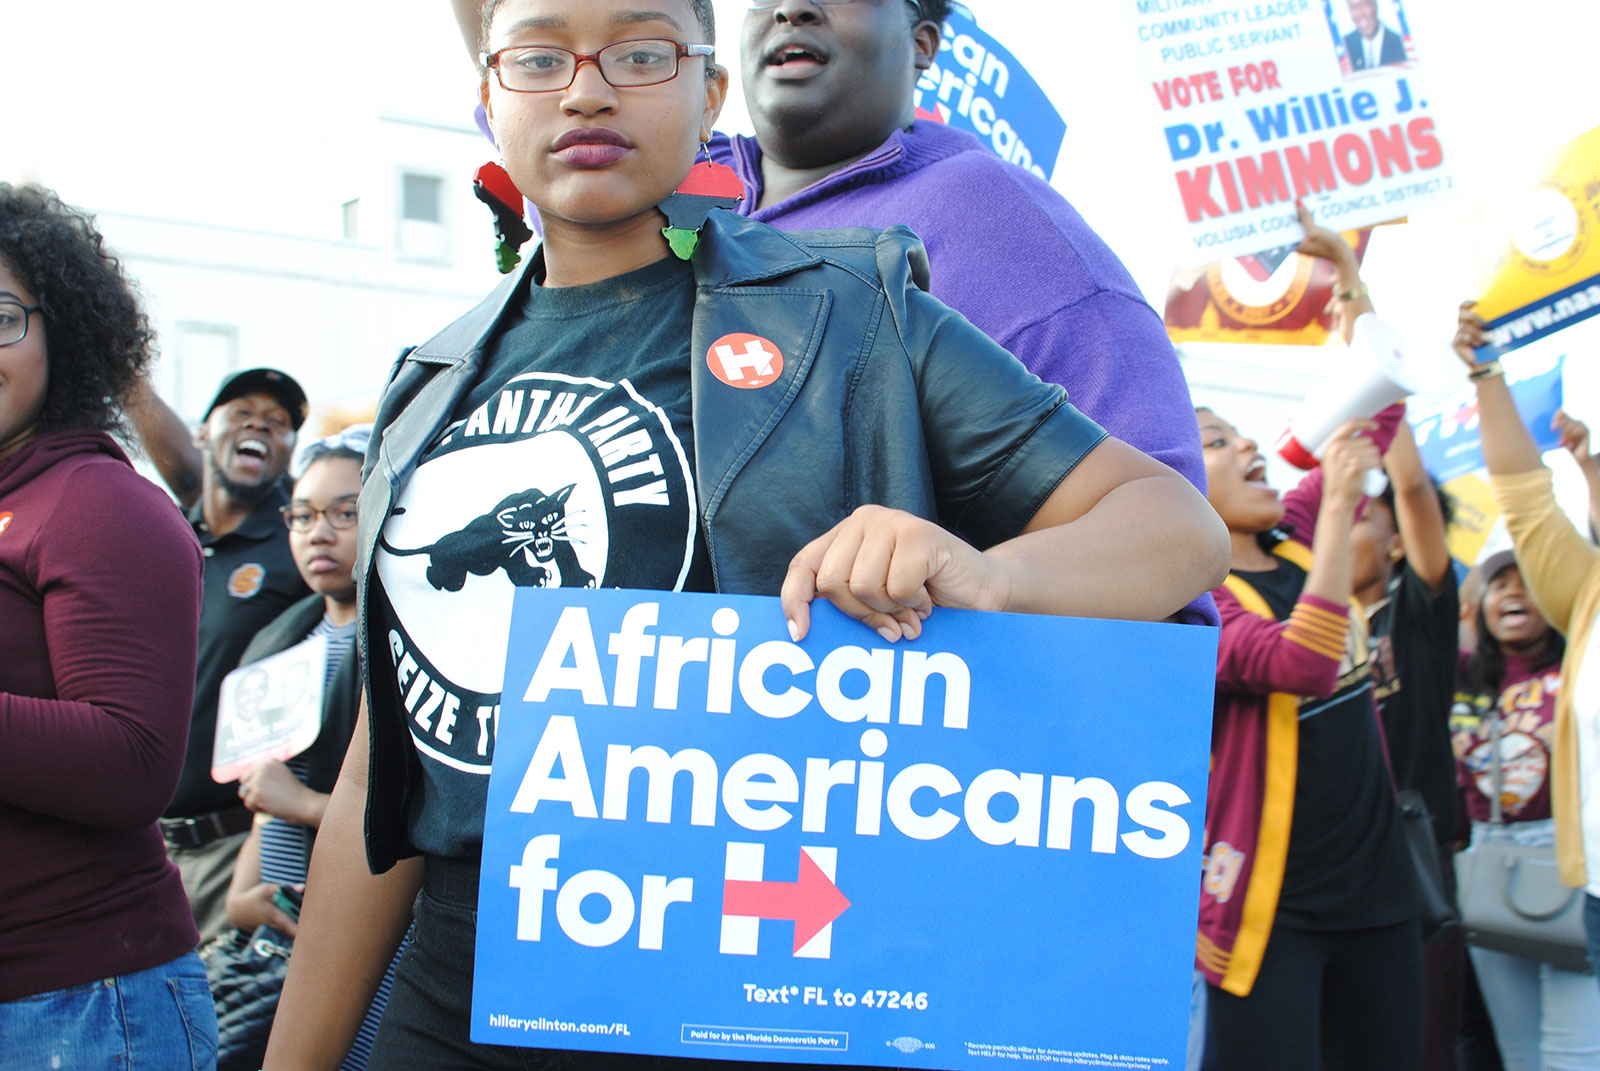 Stephen Cummings, African Americans for Hillary, 2016